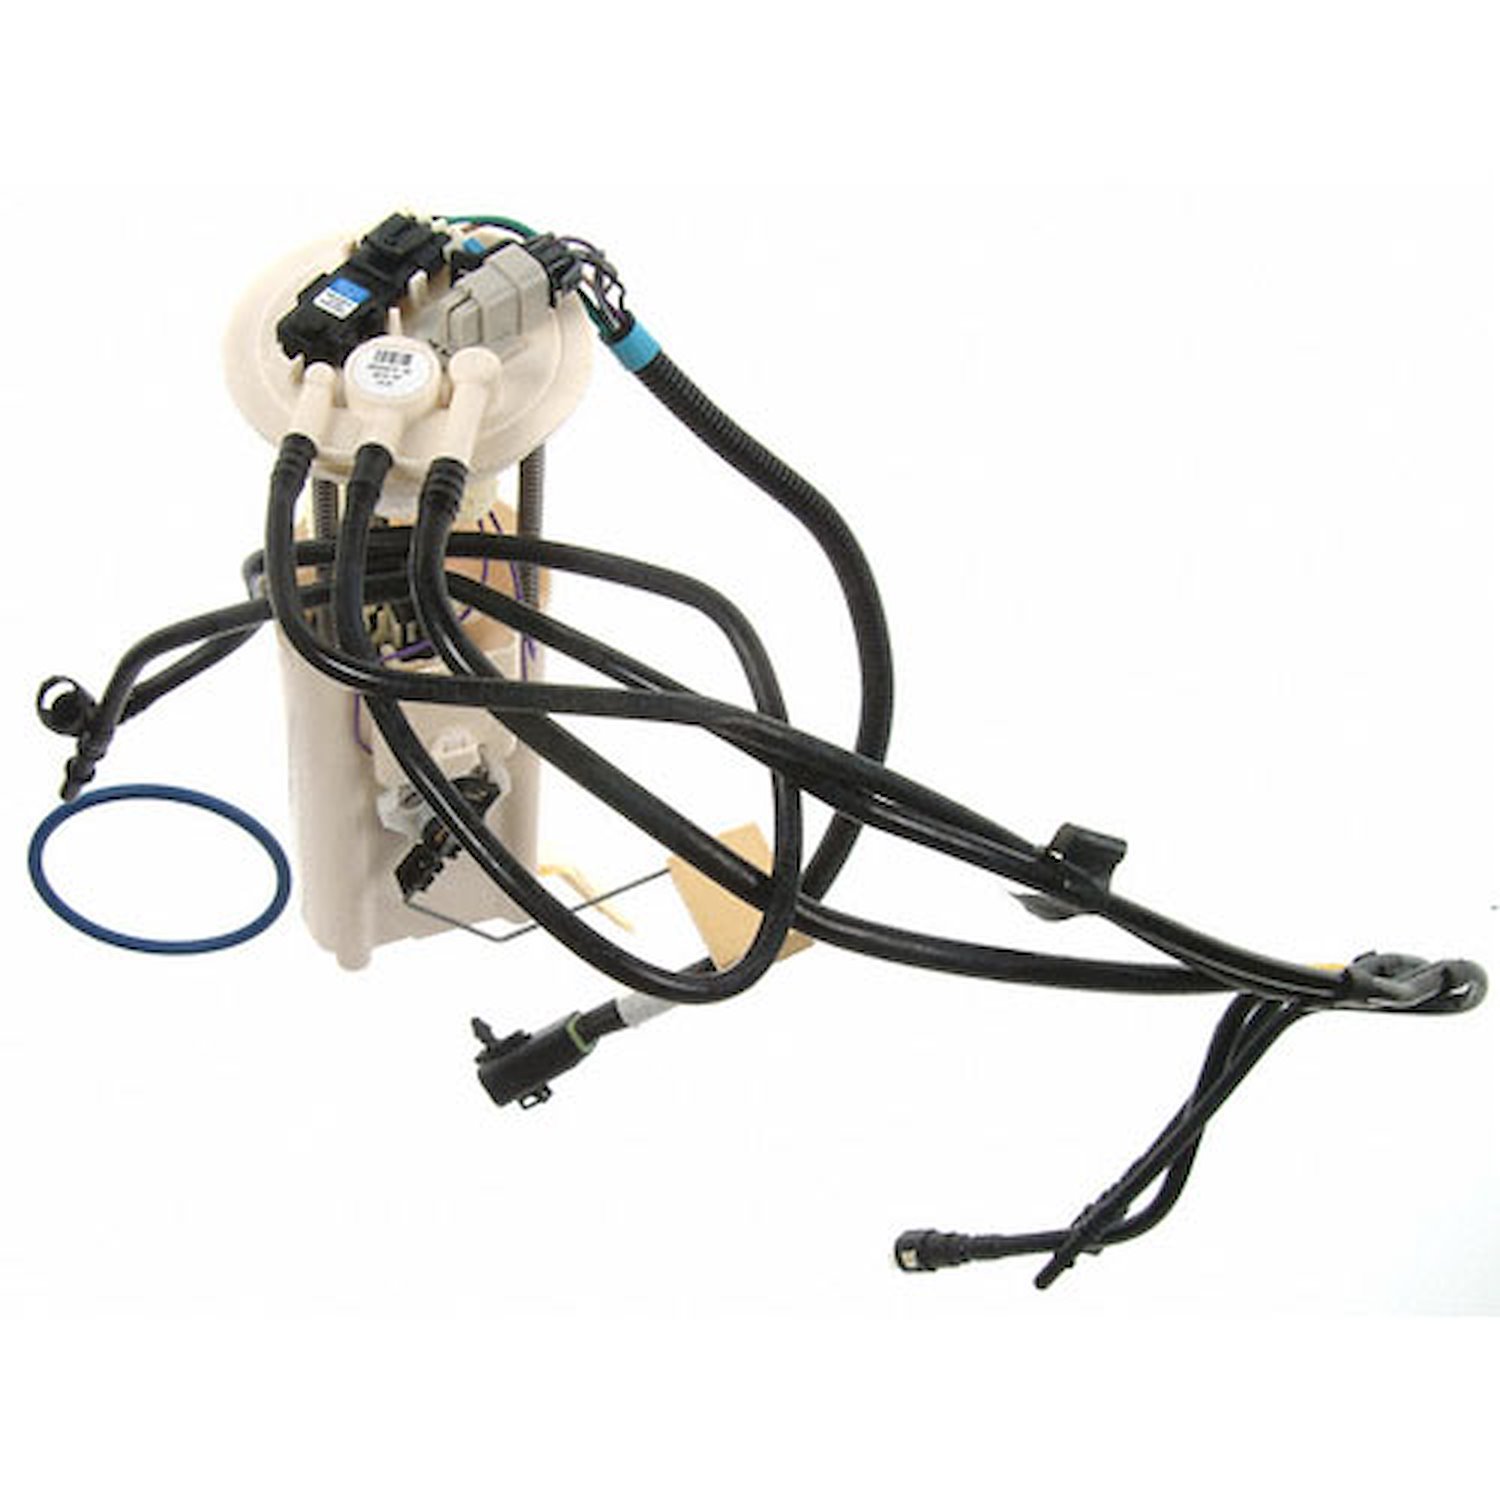 OE GM Replacement Electric Fuel Pump Module Assembly 2000-01 Chevrolet Lumina 3.1L V6